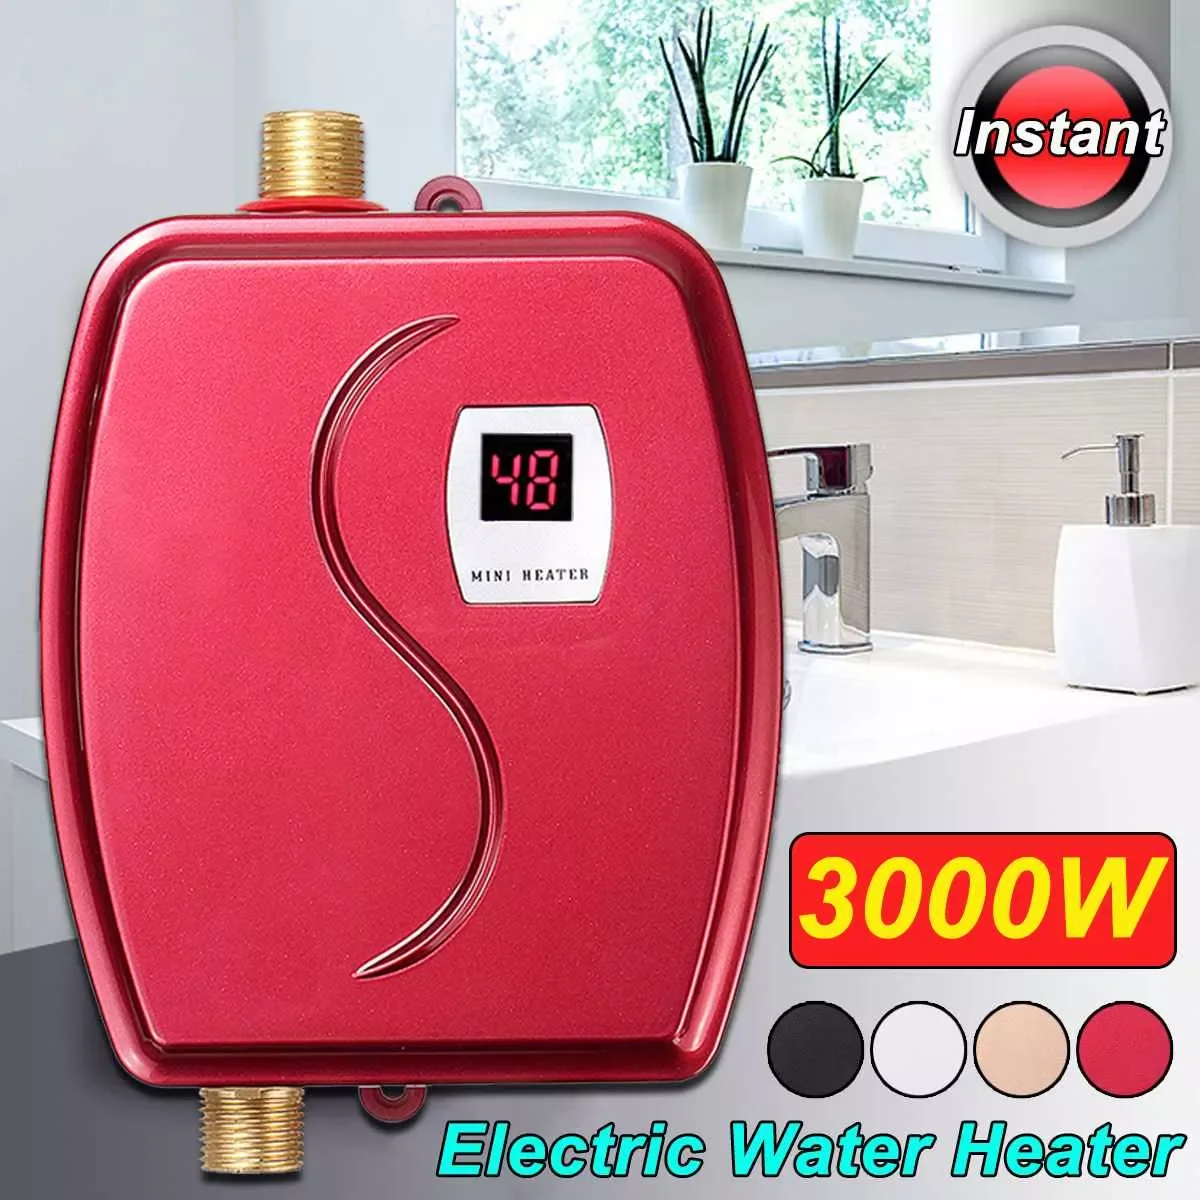 Enlarge High Quality Instant Tankless Water Heater 3000w 220V 110V Thermostat Induction Heater Electric Heaters Shower Fast Heating